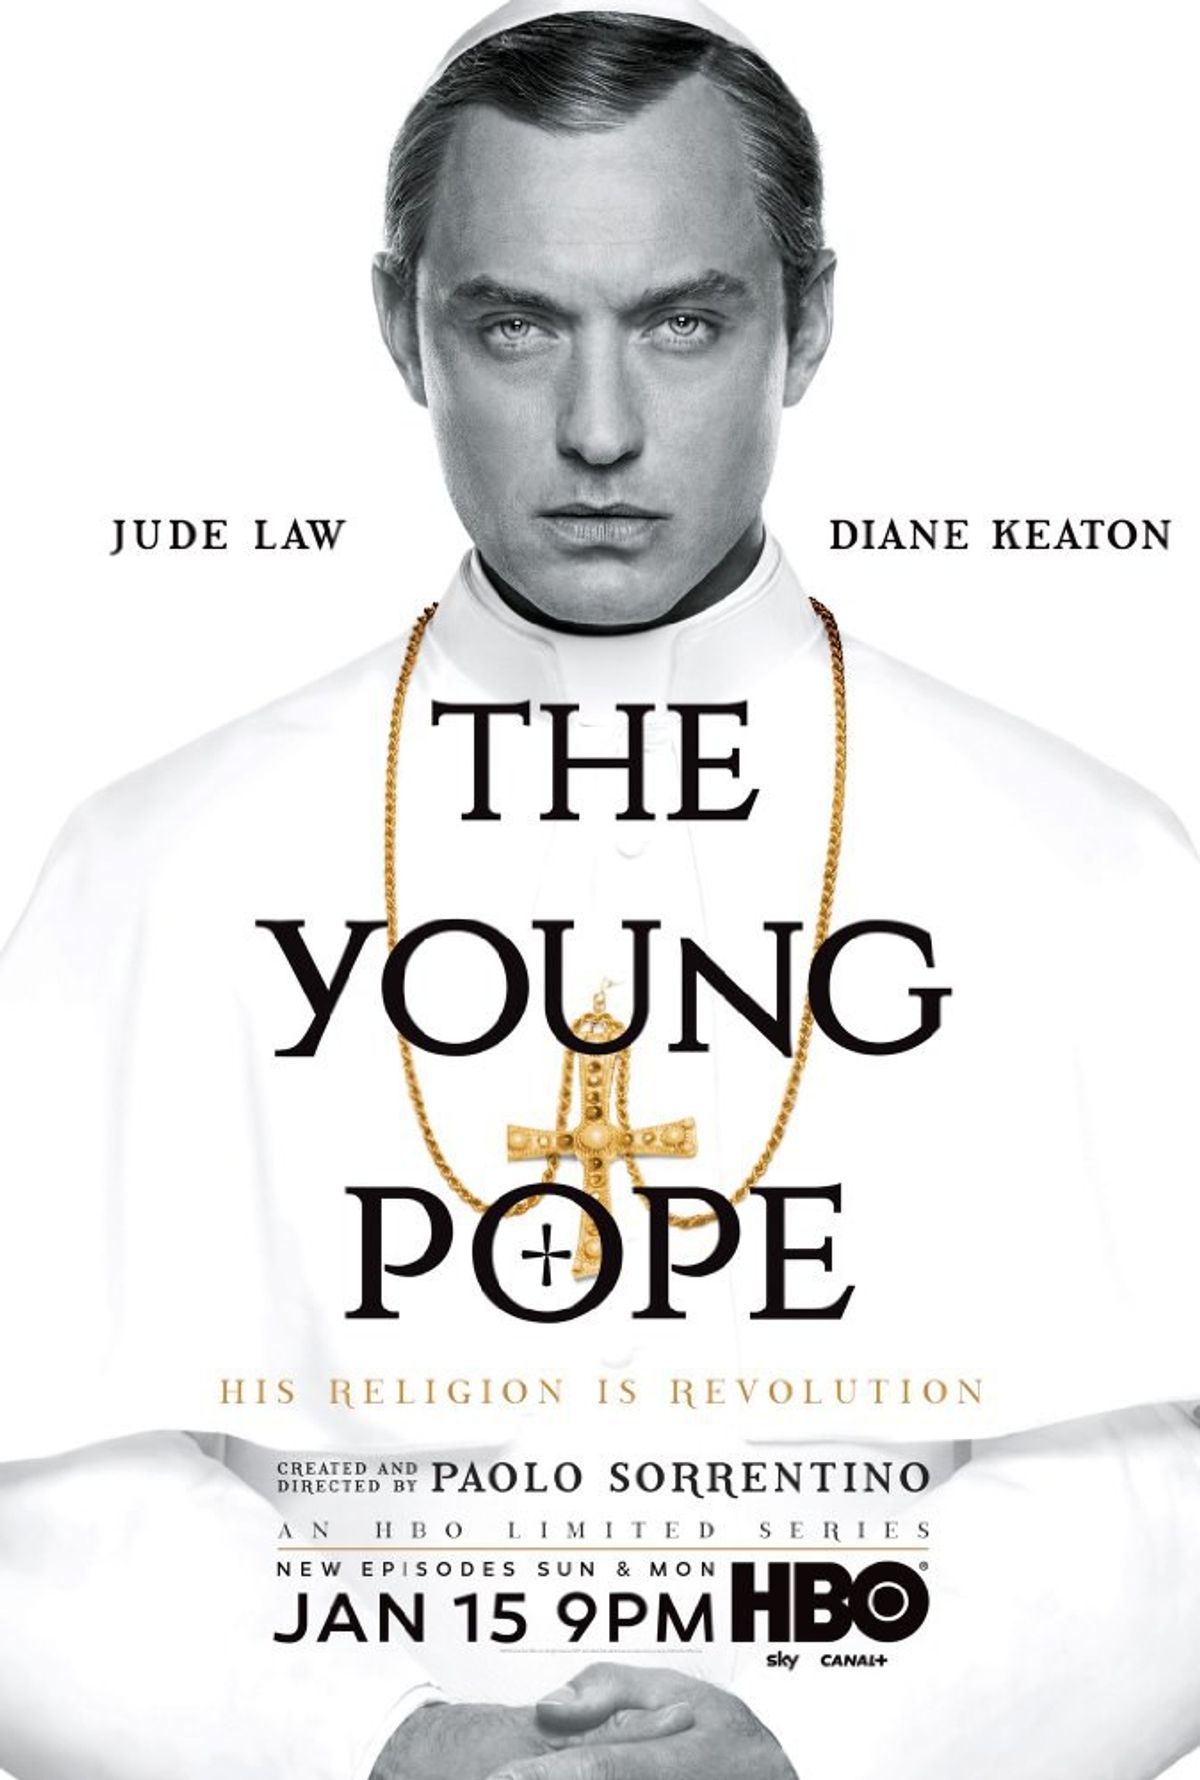 Saint, Sinner, Pope, Man: Why HBO's 'Young Pope' Is Worth Watching